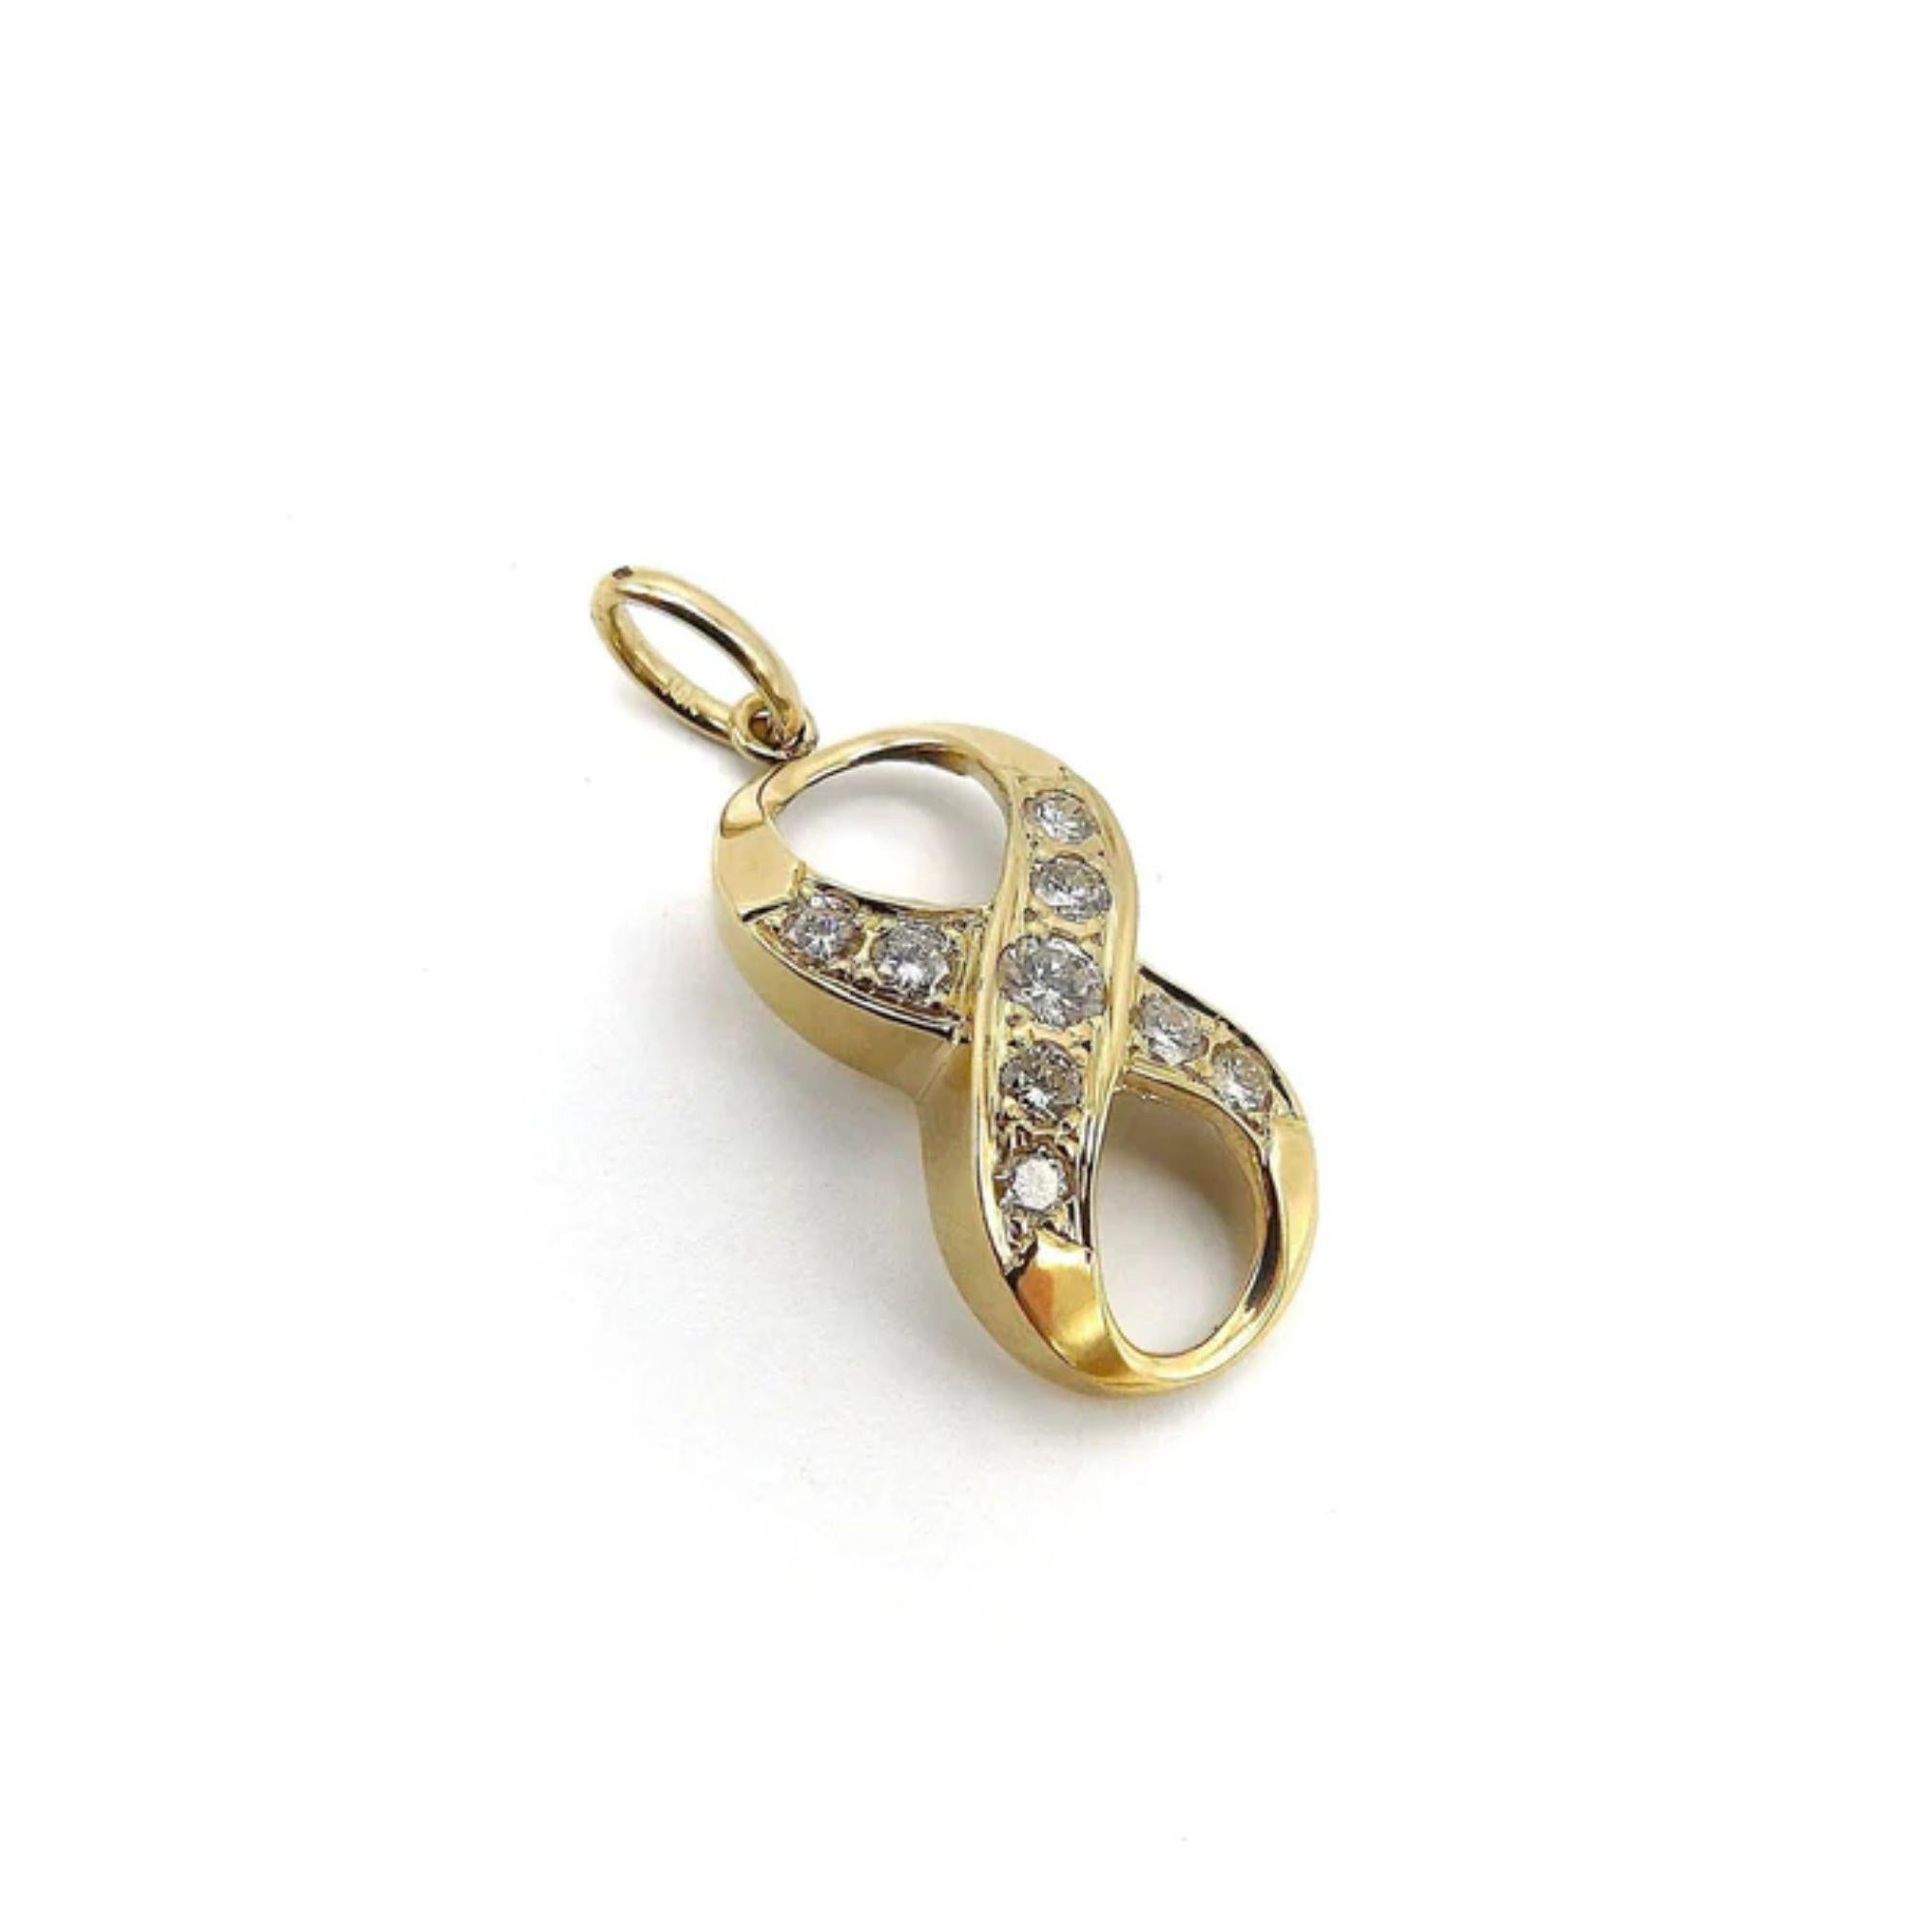 This is a sinuous infinity or lucky 8 pendant. Crafted in 14 karat yellow gold, the lines of the infinity gracefully crosses over and intertwines creating a beautiful form.  In the center is a 3.5 mm round cut diamond that is flanked by 8 more bead